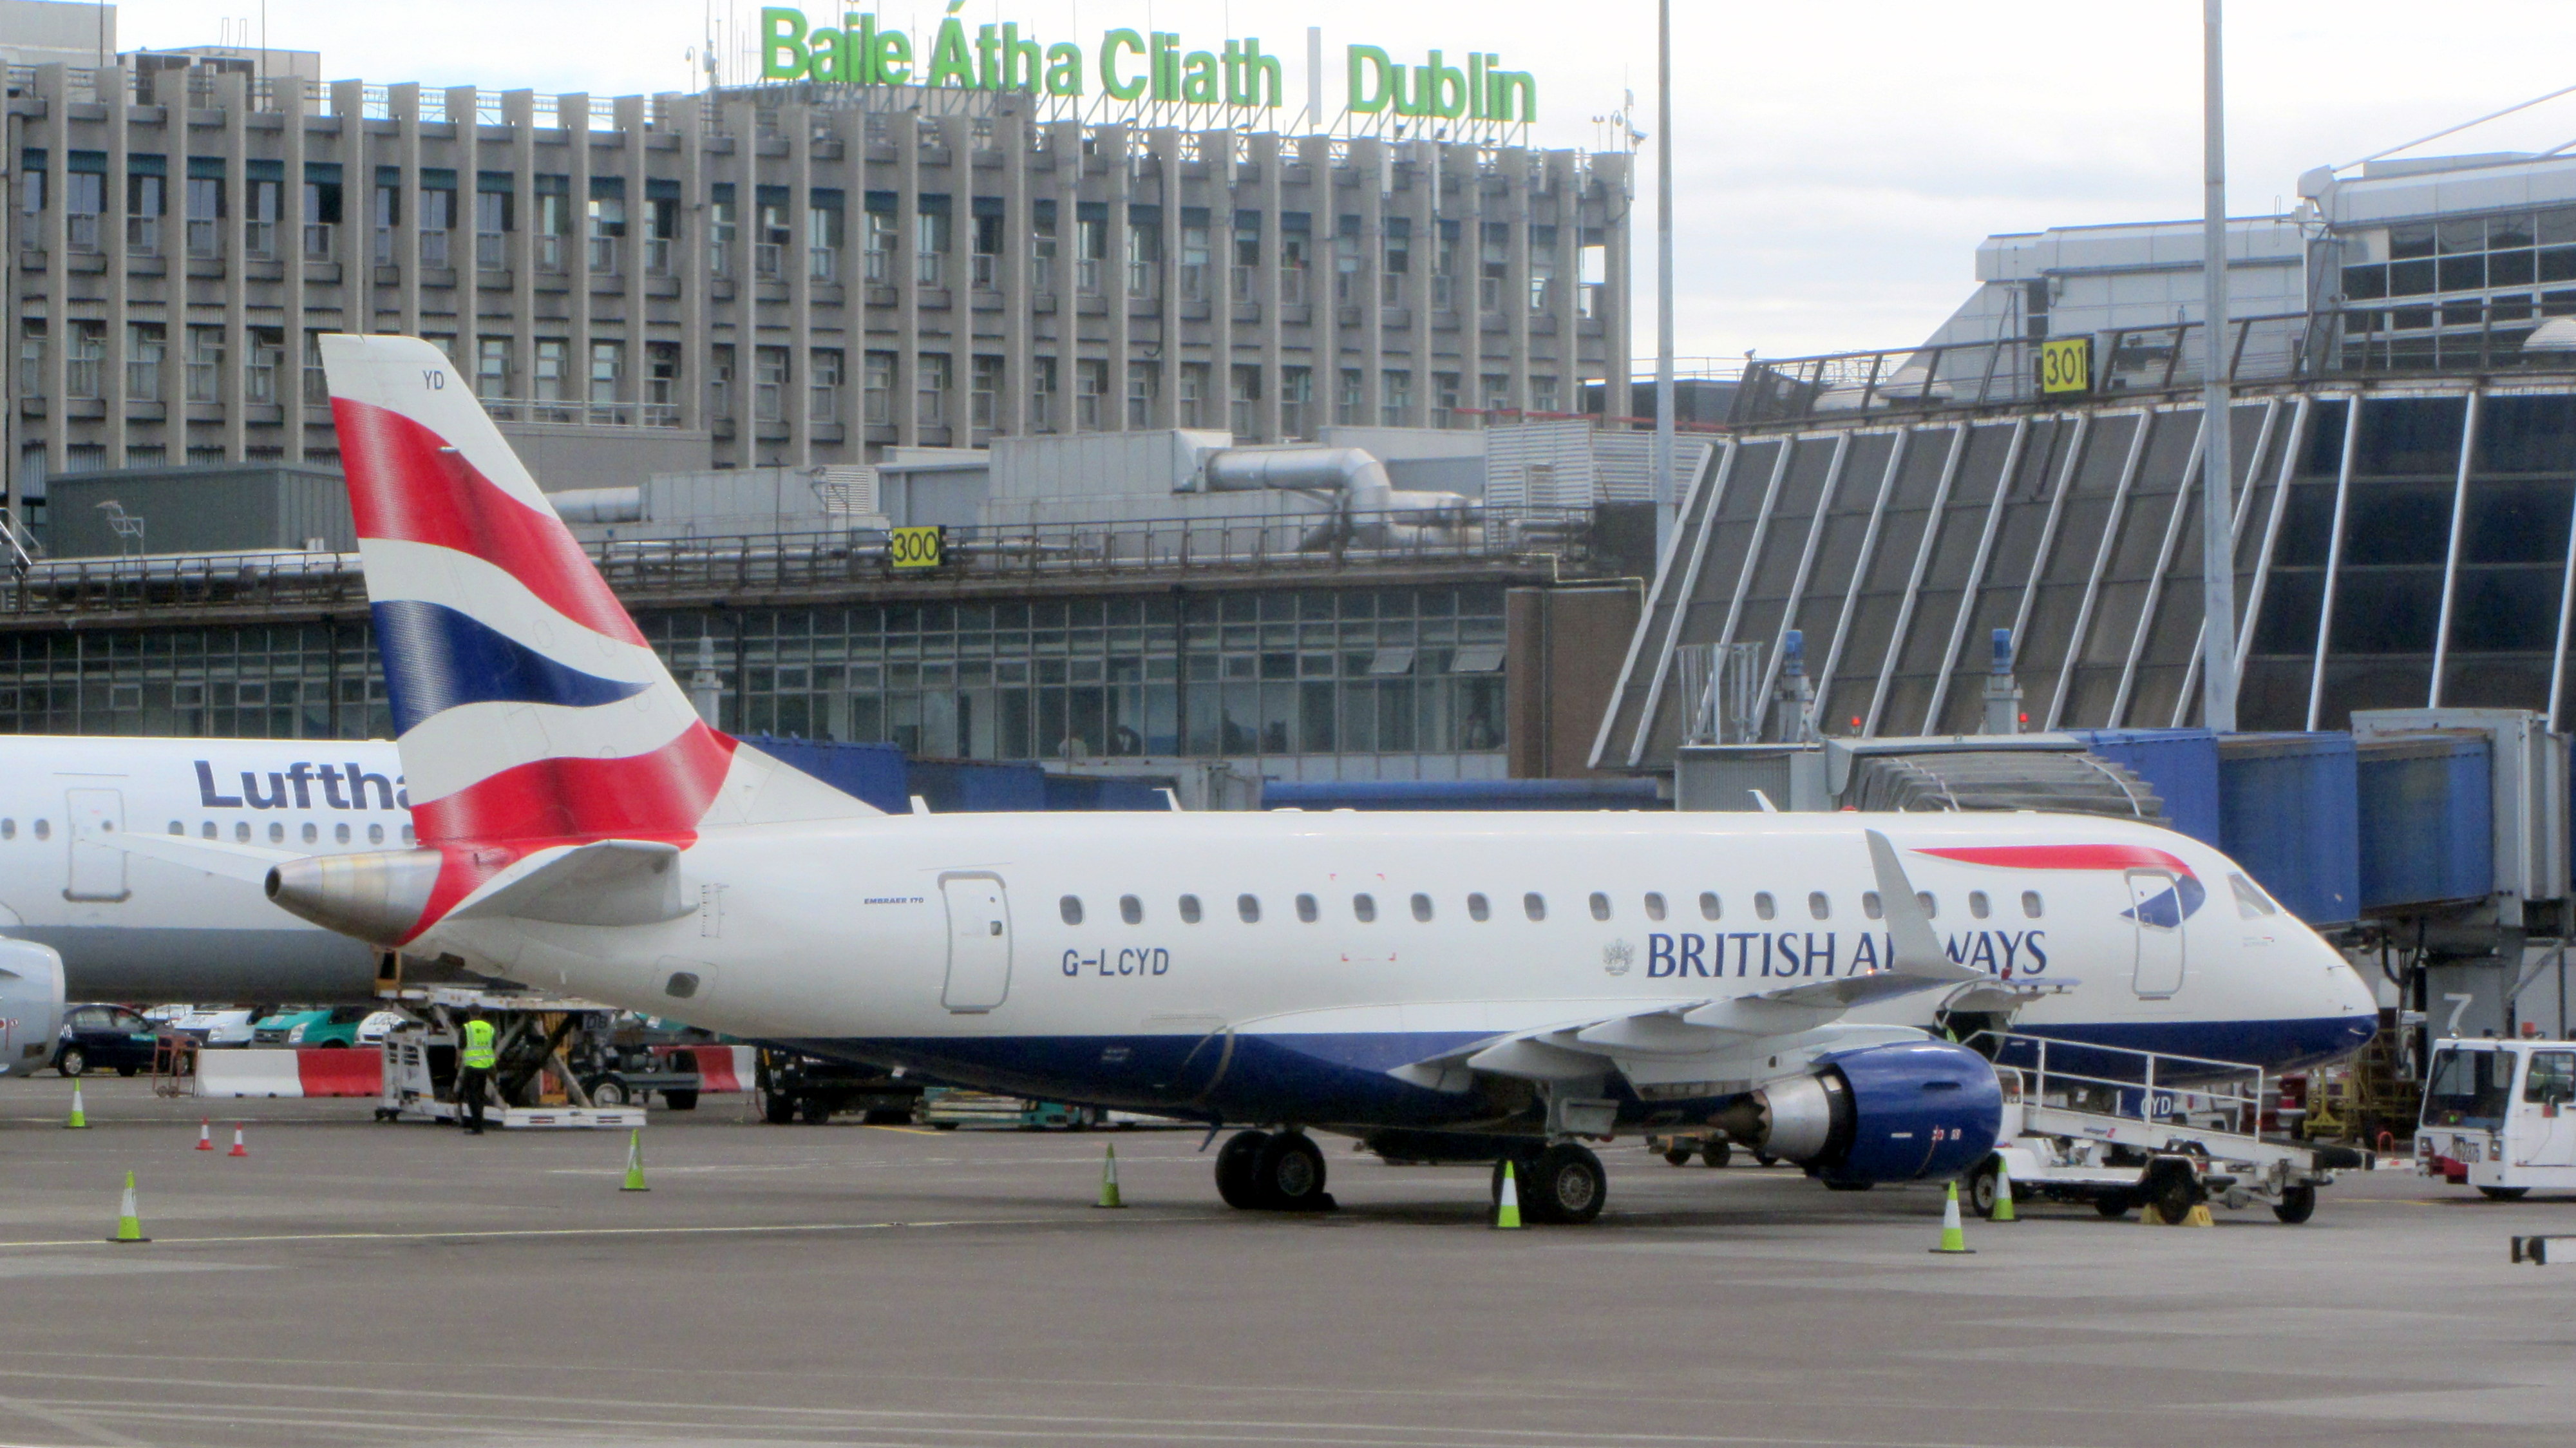 While waiting for a gate to become available, a BA CityFlier E170 ready to depart to London City